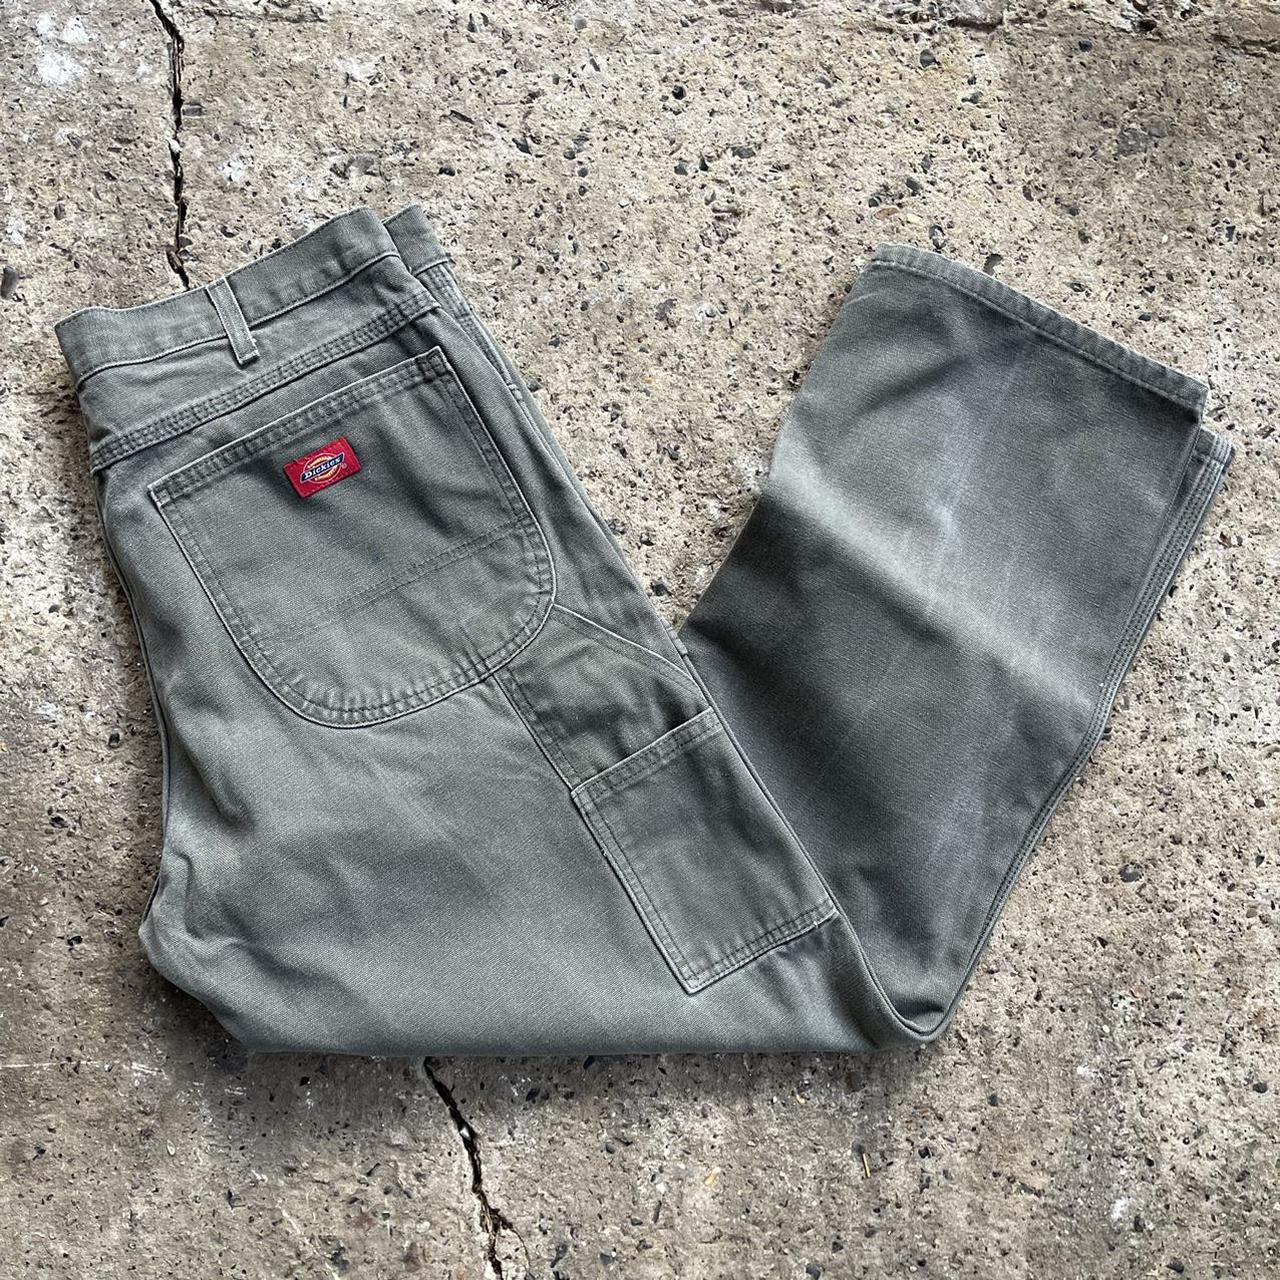 Product Image 1 - Vintage dickies Carpenter Trousers

Faded green